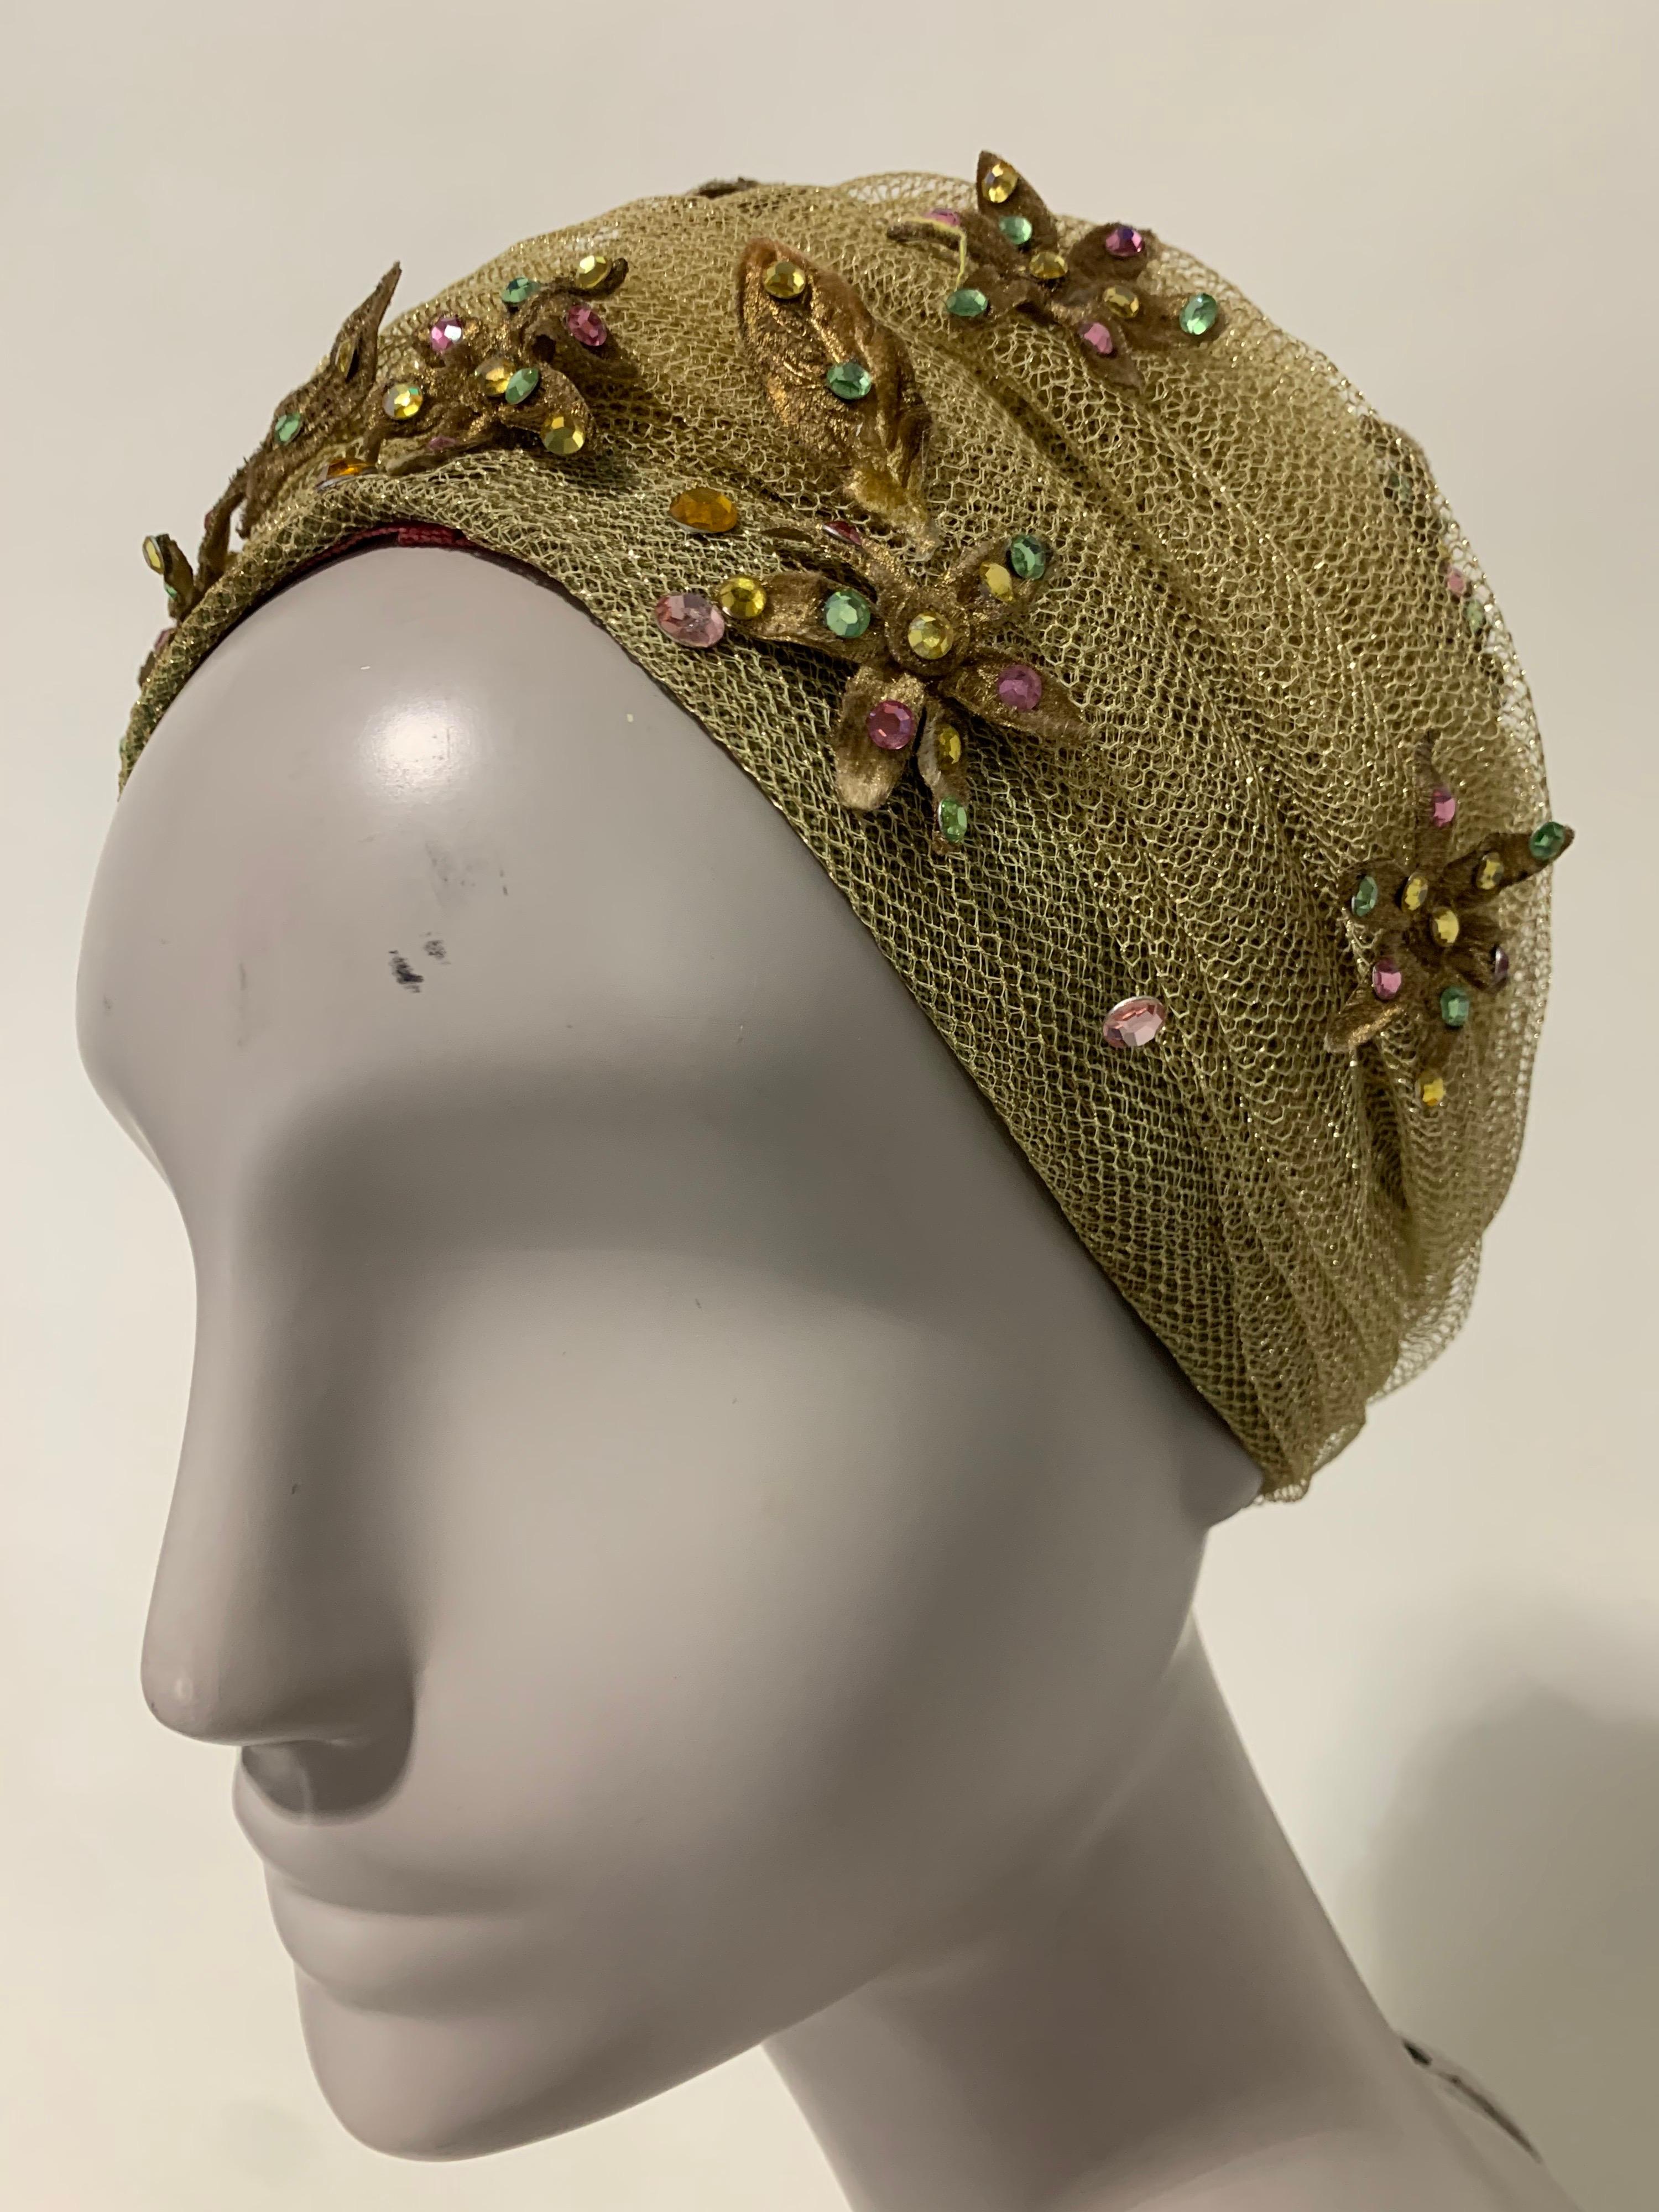 1960s Christian Dior gold mesh turban hat with metallic fabric flowers sprinkled with multicolor rhinestones. Theatrical glamour by Marc Bohan for Christian Dior. Grosgrain inner band. Size Medium.